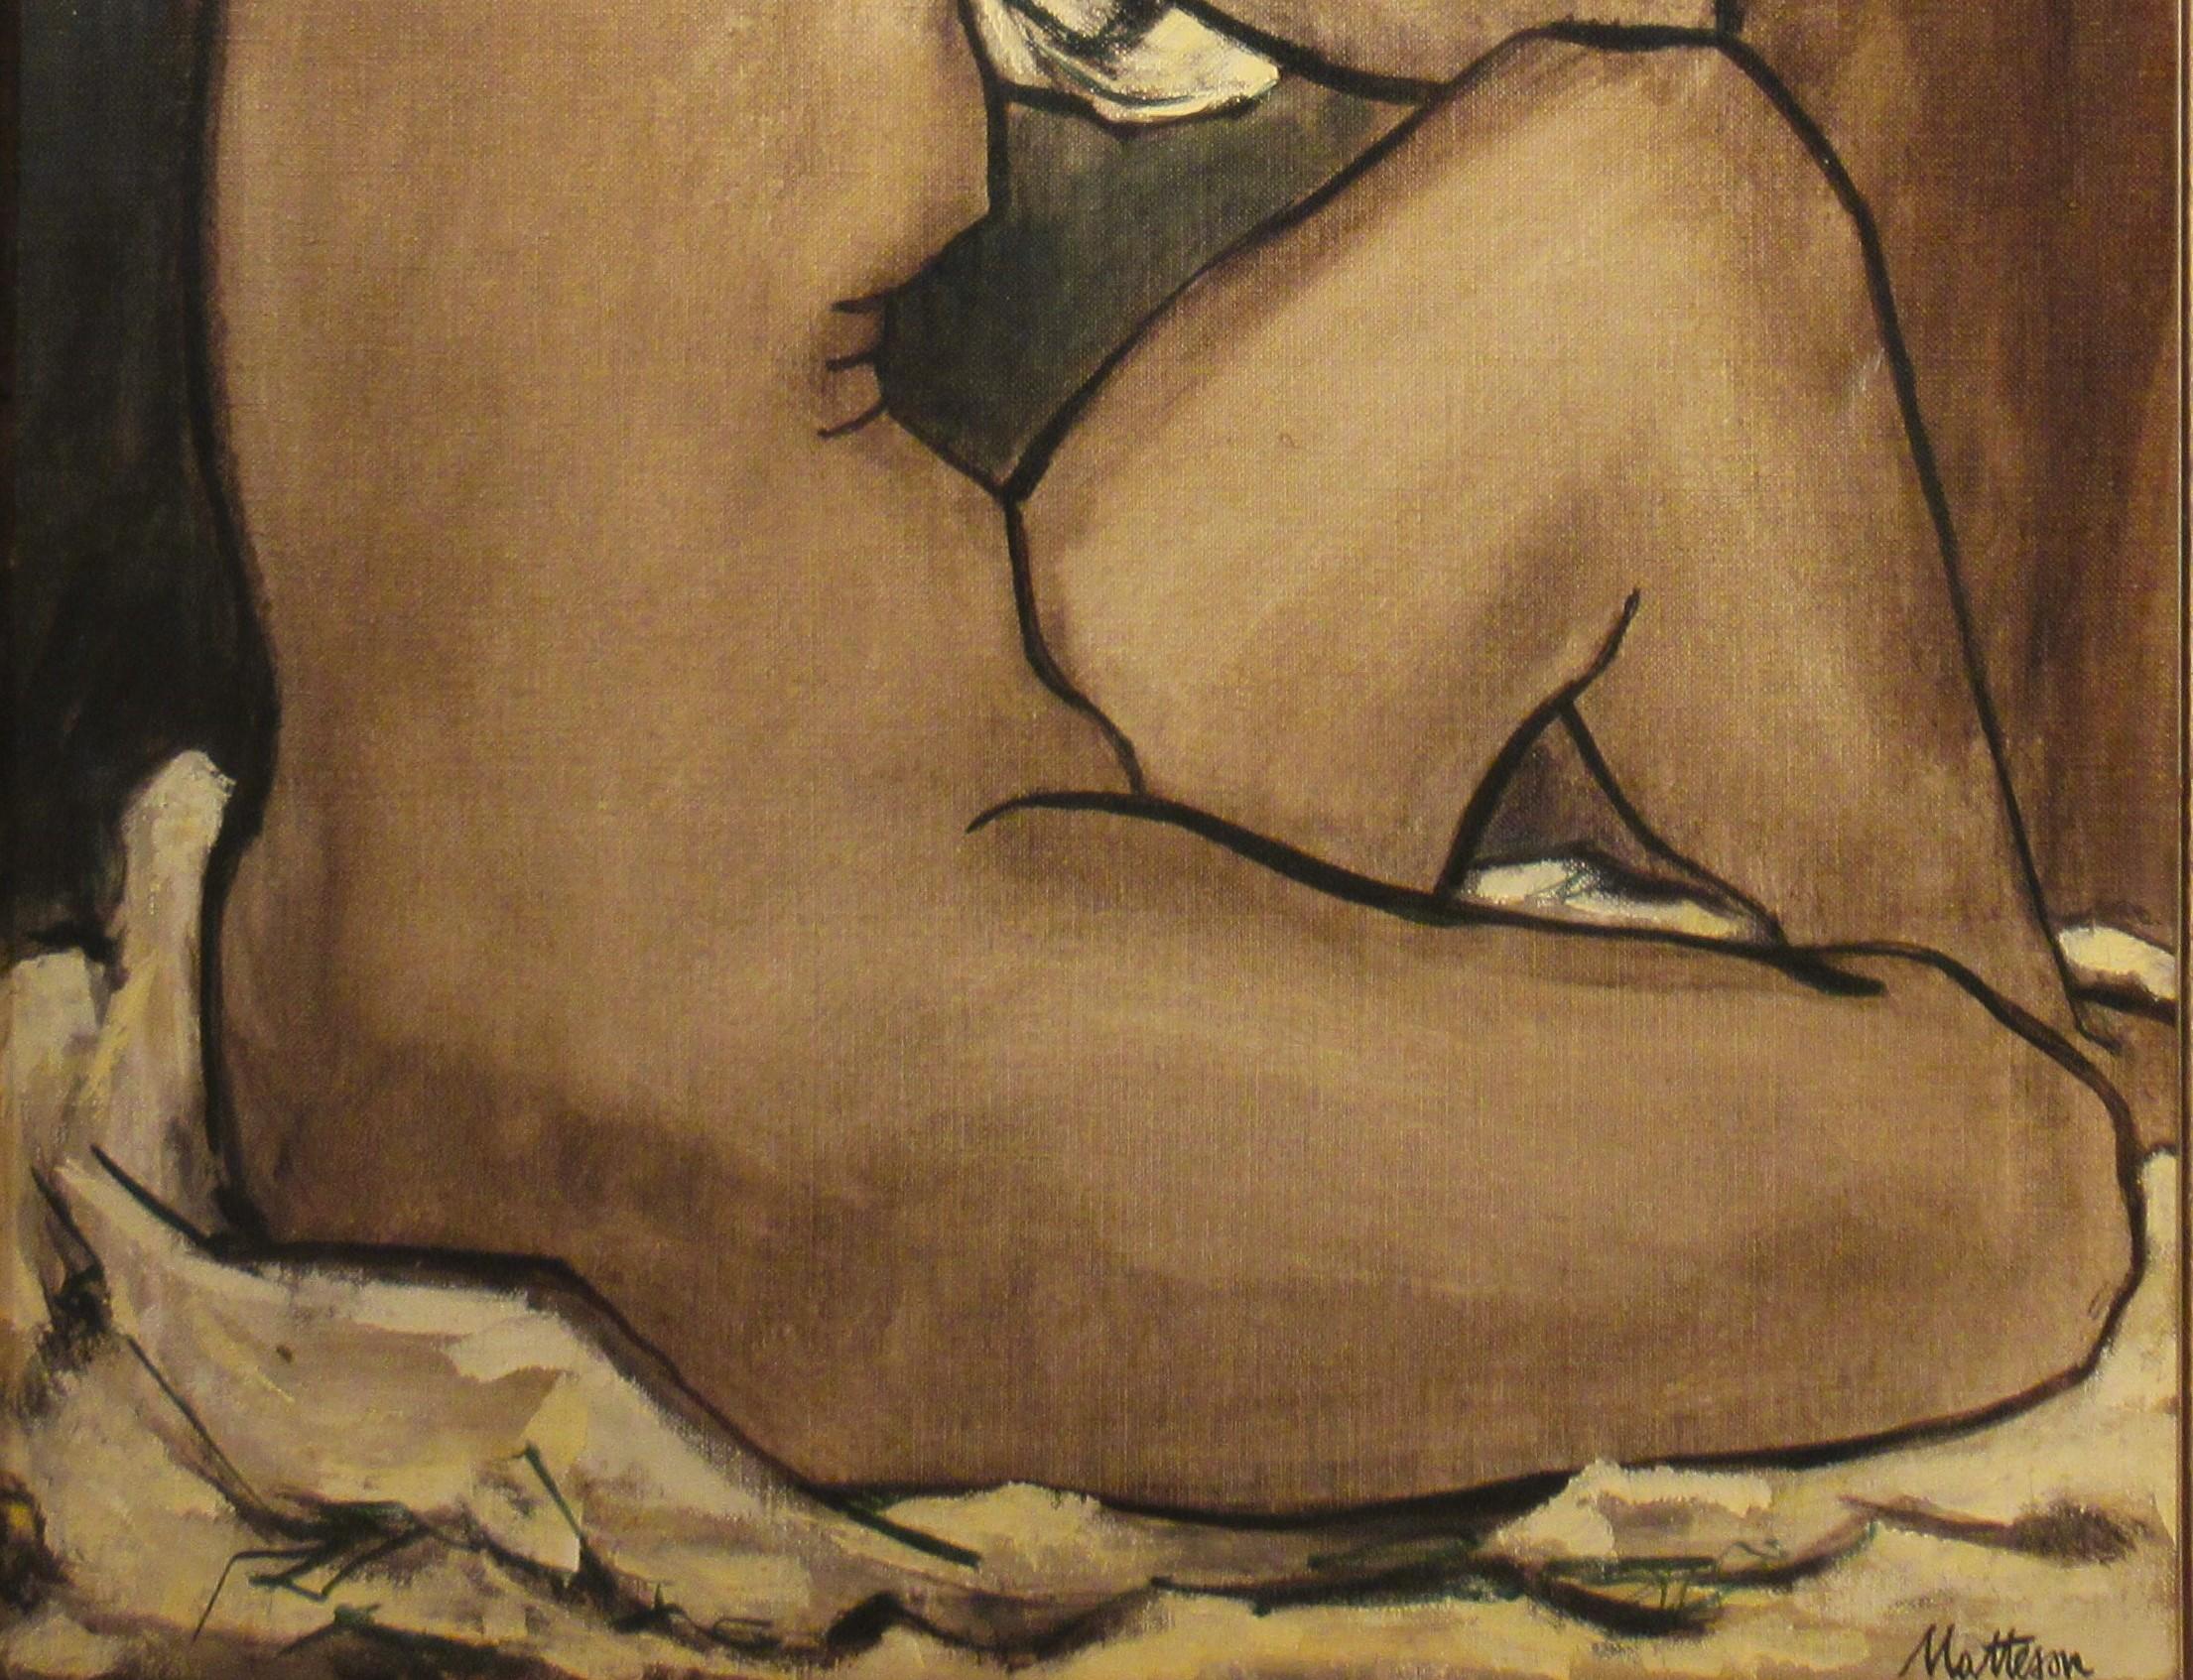 Nude Drying Her Hair - Brown Figurative Painting by Rip Matteson